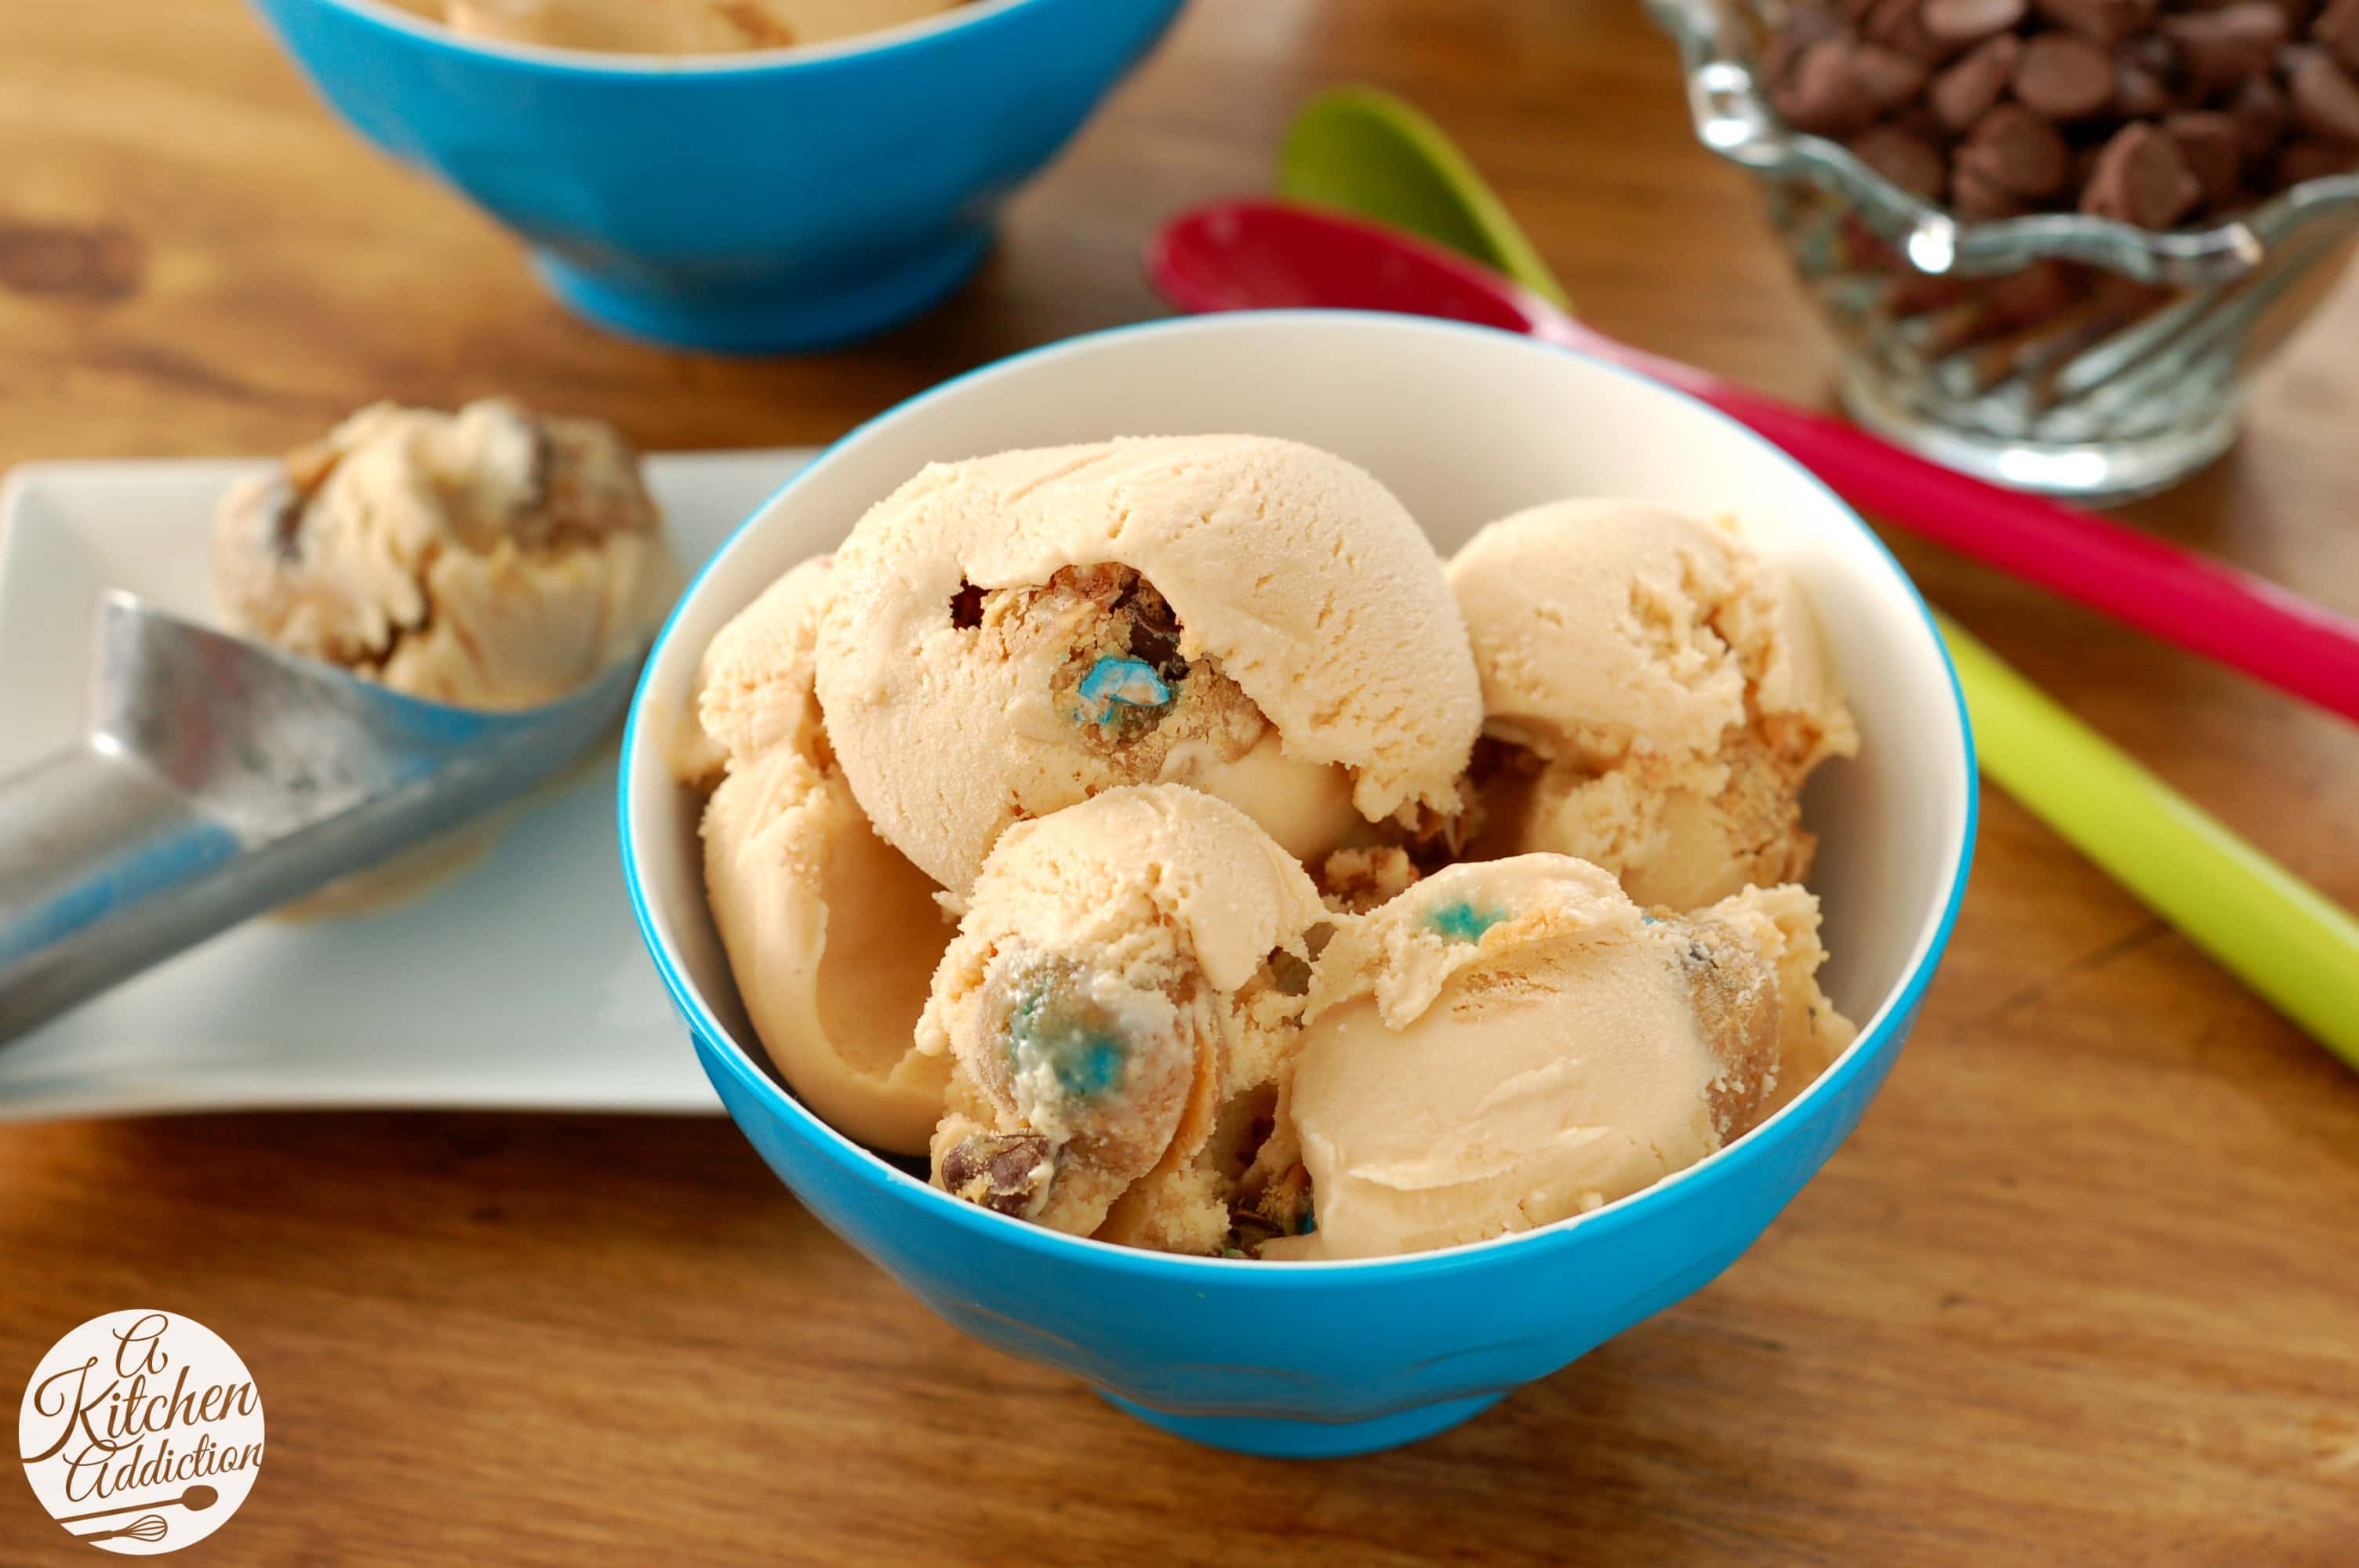 https://www.a-kitchen-addiction.com/wp-content/uploads/2013/08/monster-cookie-dough-ice-cream-w-name.jpg